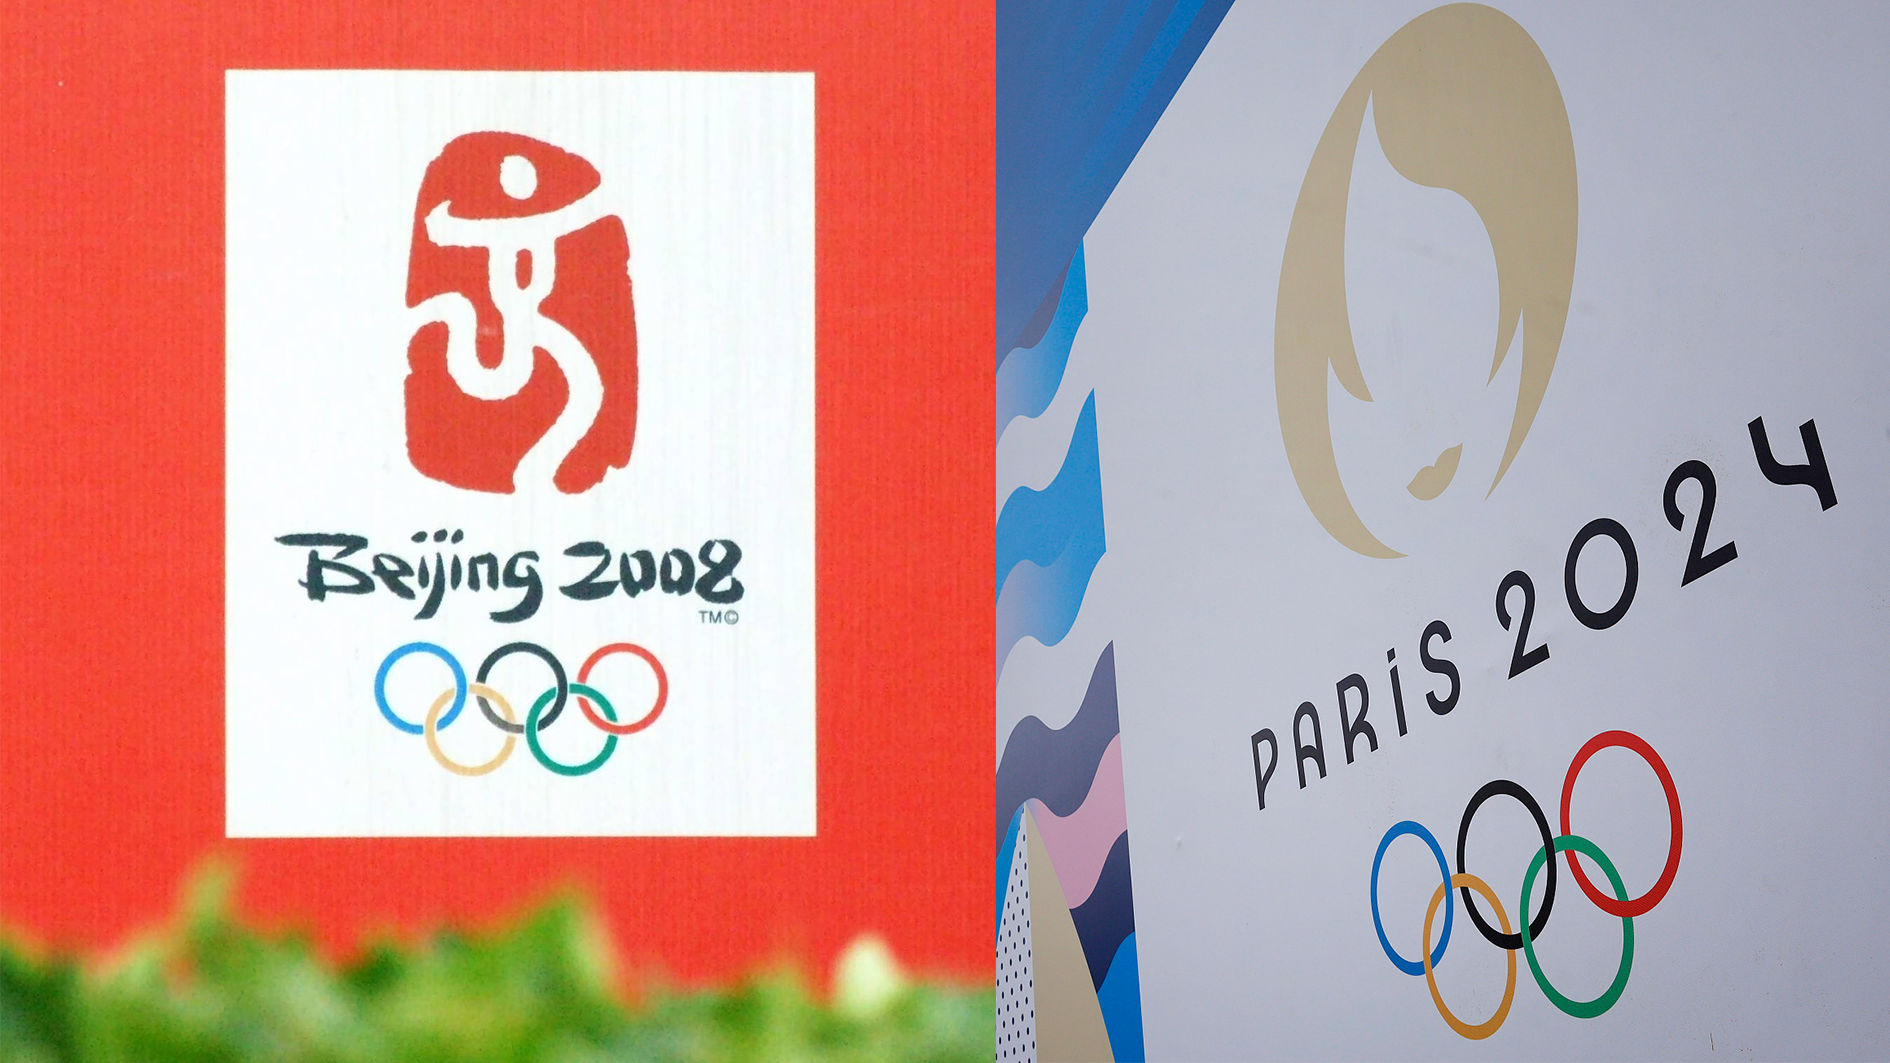 Two boards feature the emblems of 2008 Beijing and 2024 Paris Olympics. /CFP